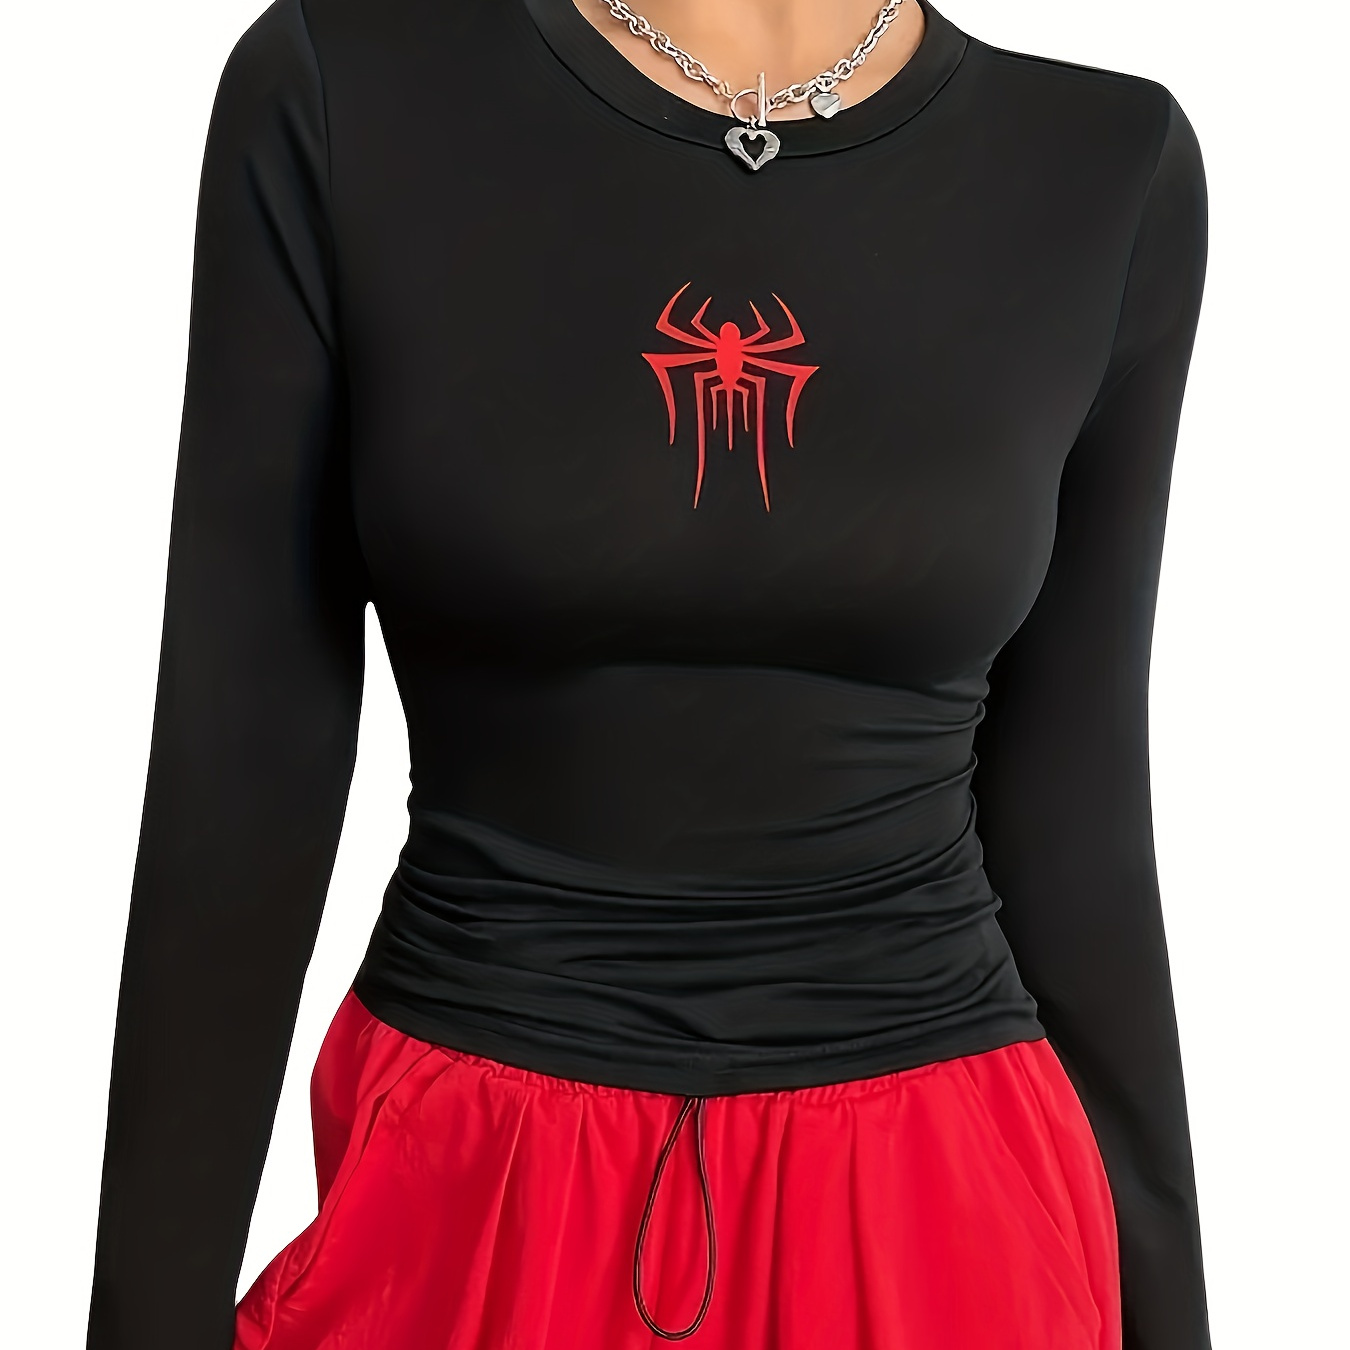 

Spider Print Crew Neck T-shirt, Casual Long Sleeve Slim Top For Spring & Fall, Women's Clothing